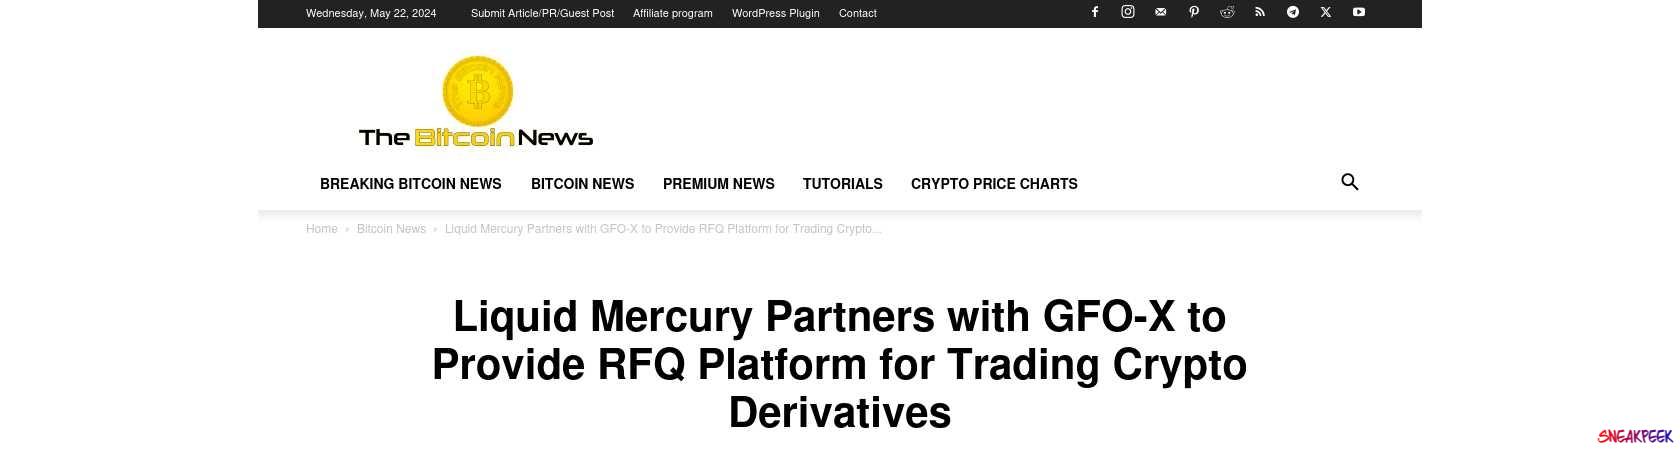 Read the full Article:  ⭲ Liquid Mercury Partners with GFO-X to Provide RFQ Platform for Trading Crypto Derivatives